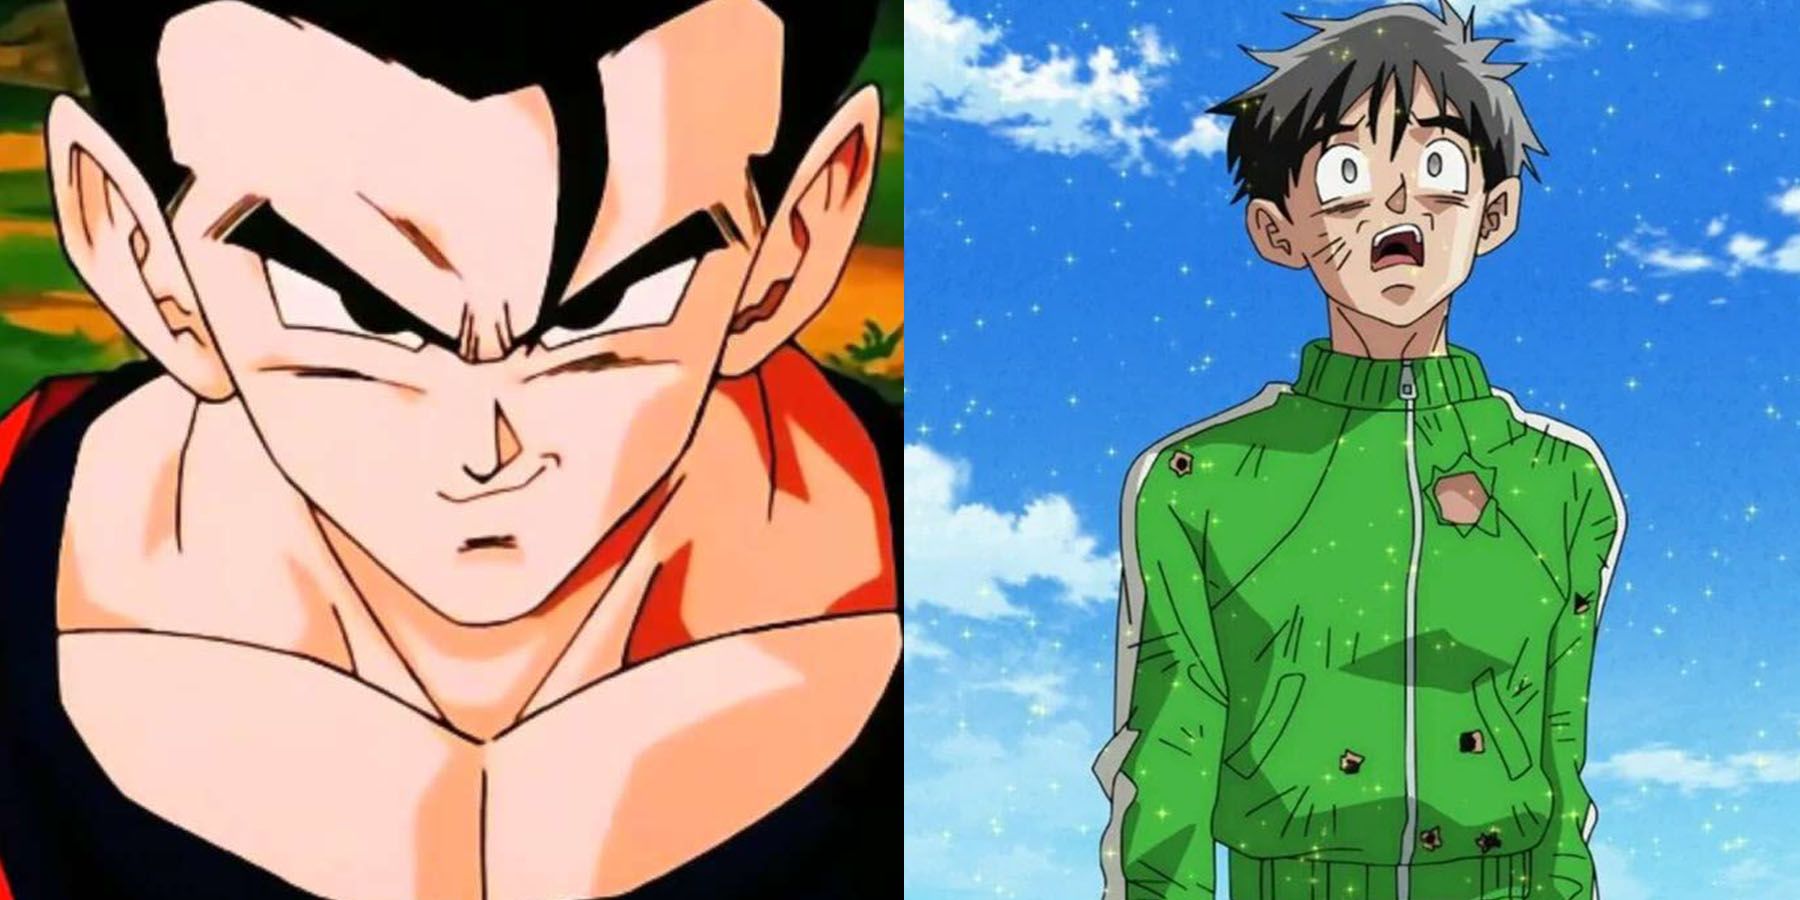 Sons Goku 10 Dark Facts About DBZs Gohan (And 10 More About Goten)